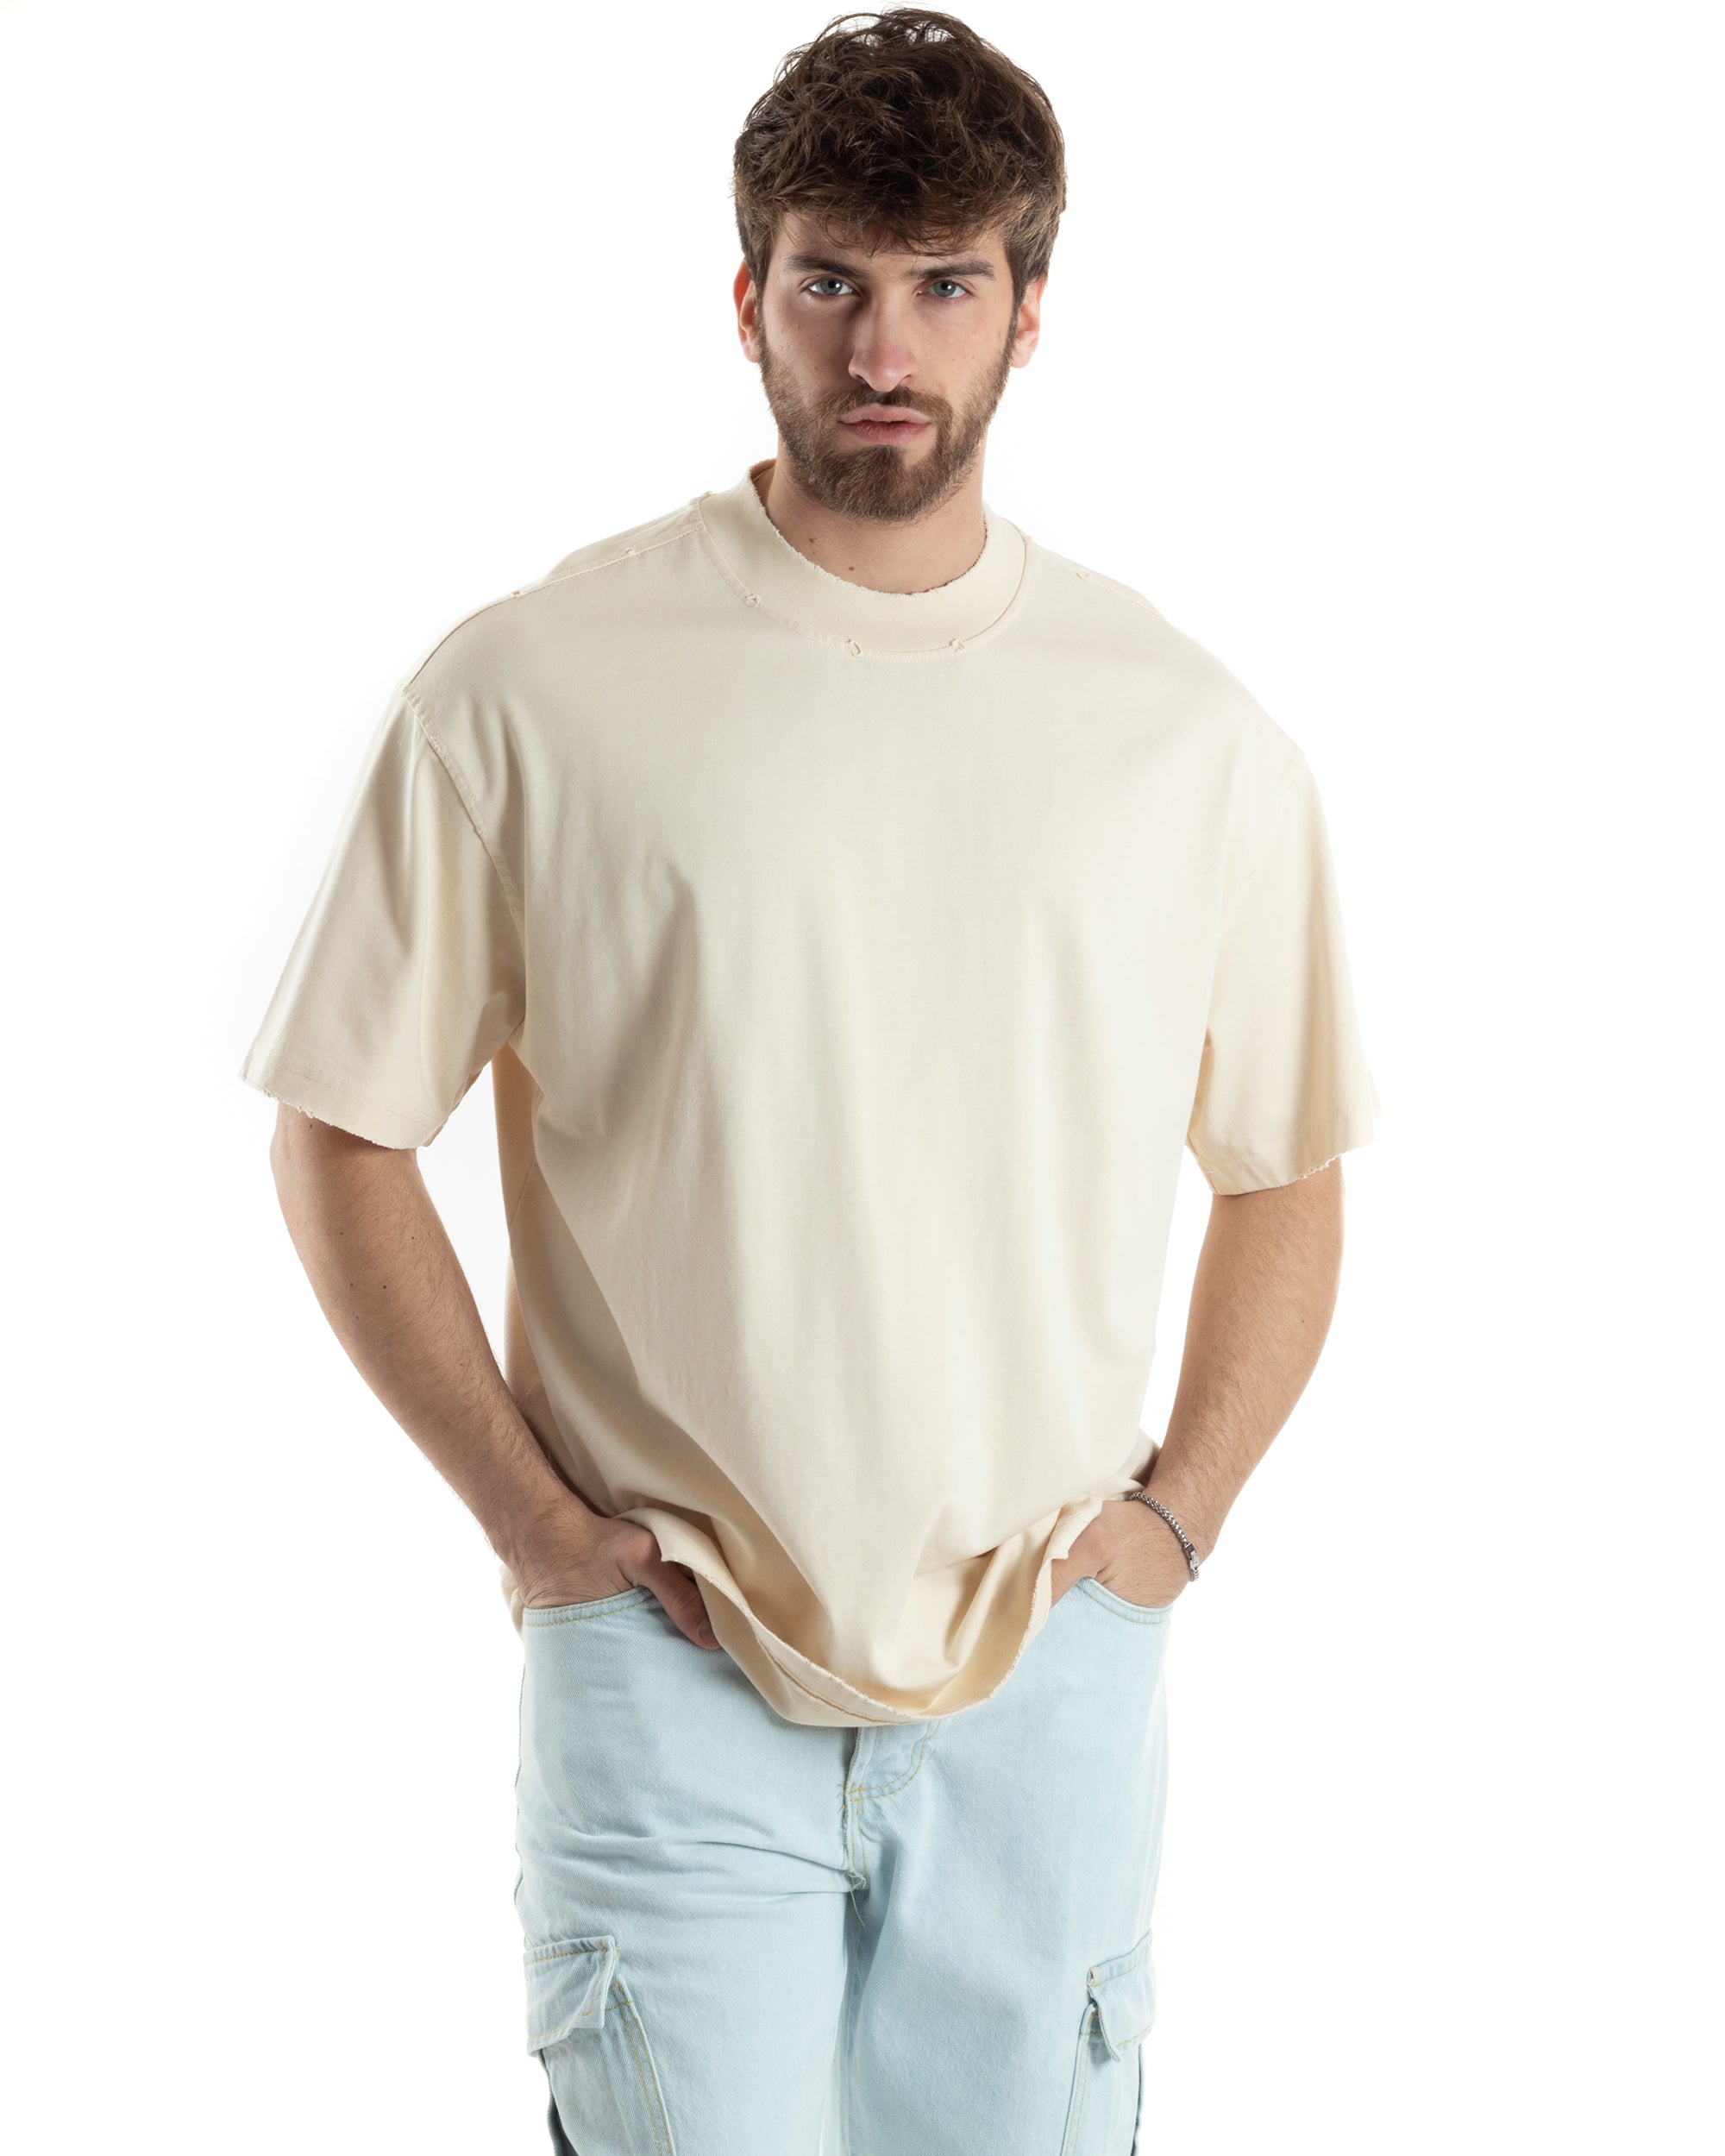 T-shirt Uomo Girocollo Boxy Fit Cotone Basic Con Rotture Relaxed Fit Gola Alta Beige GIOSAL-TS3015A